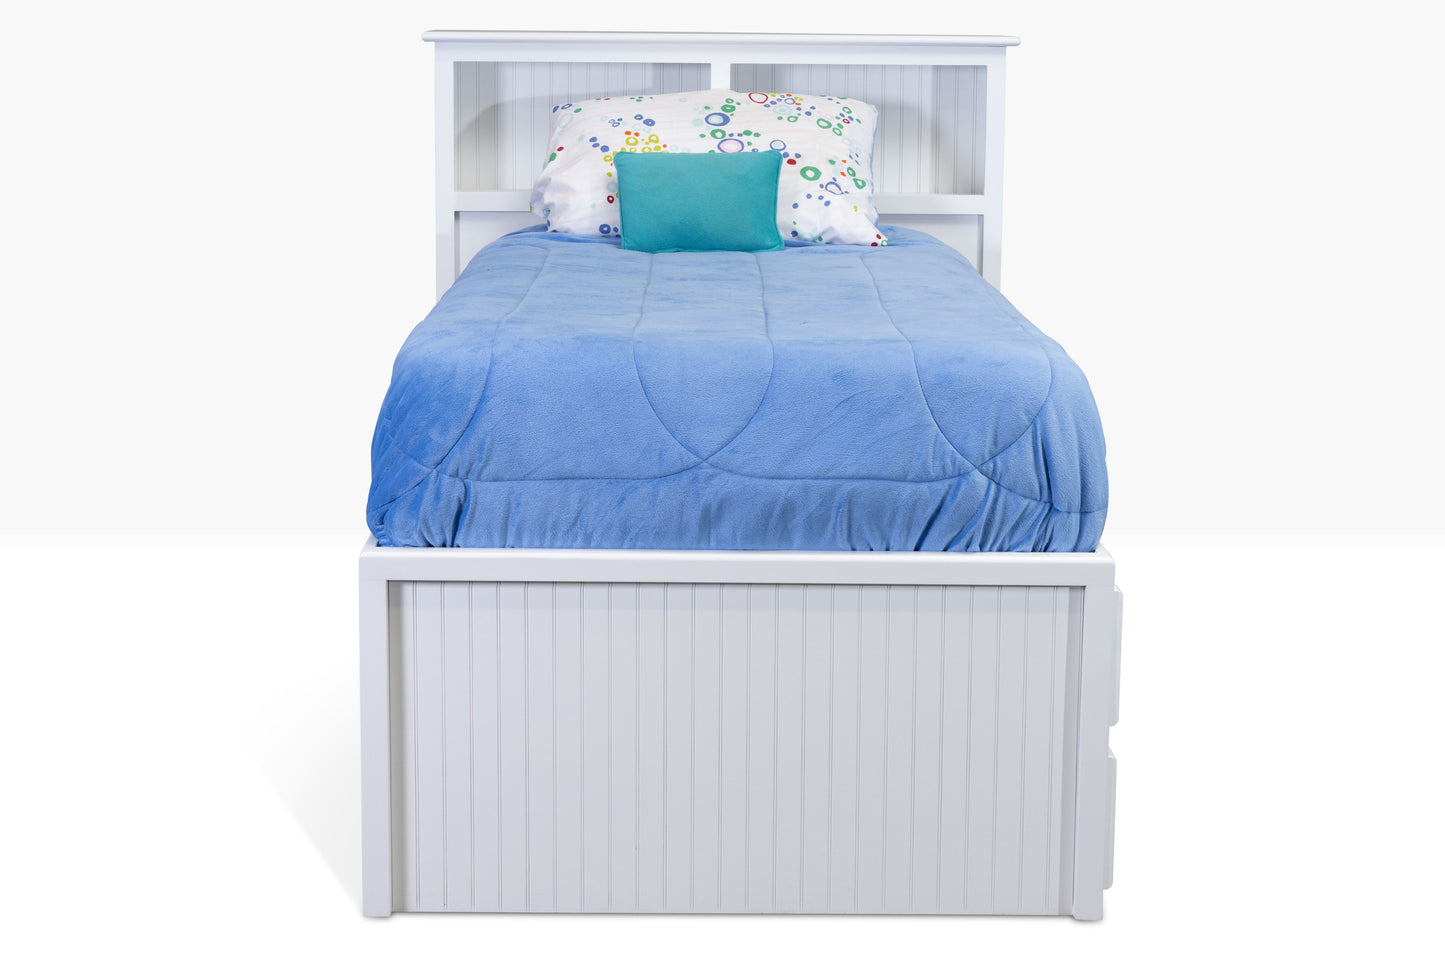 Acadia Cottage Storage Bed with 6 drawers on each side and a book case headboard for storage. Pictured in white with bead board end.